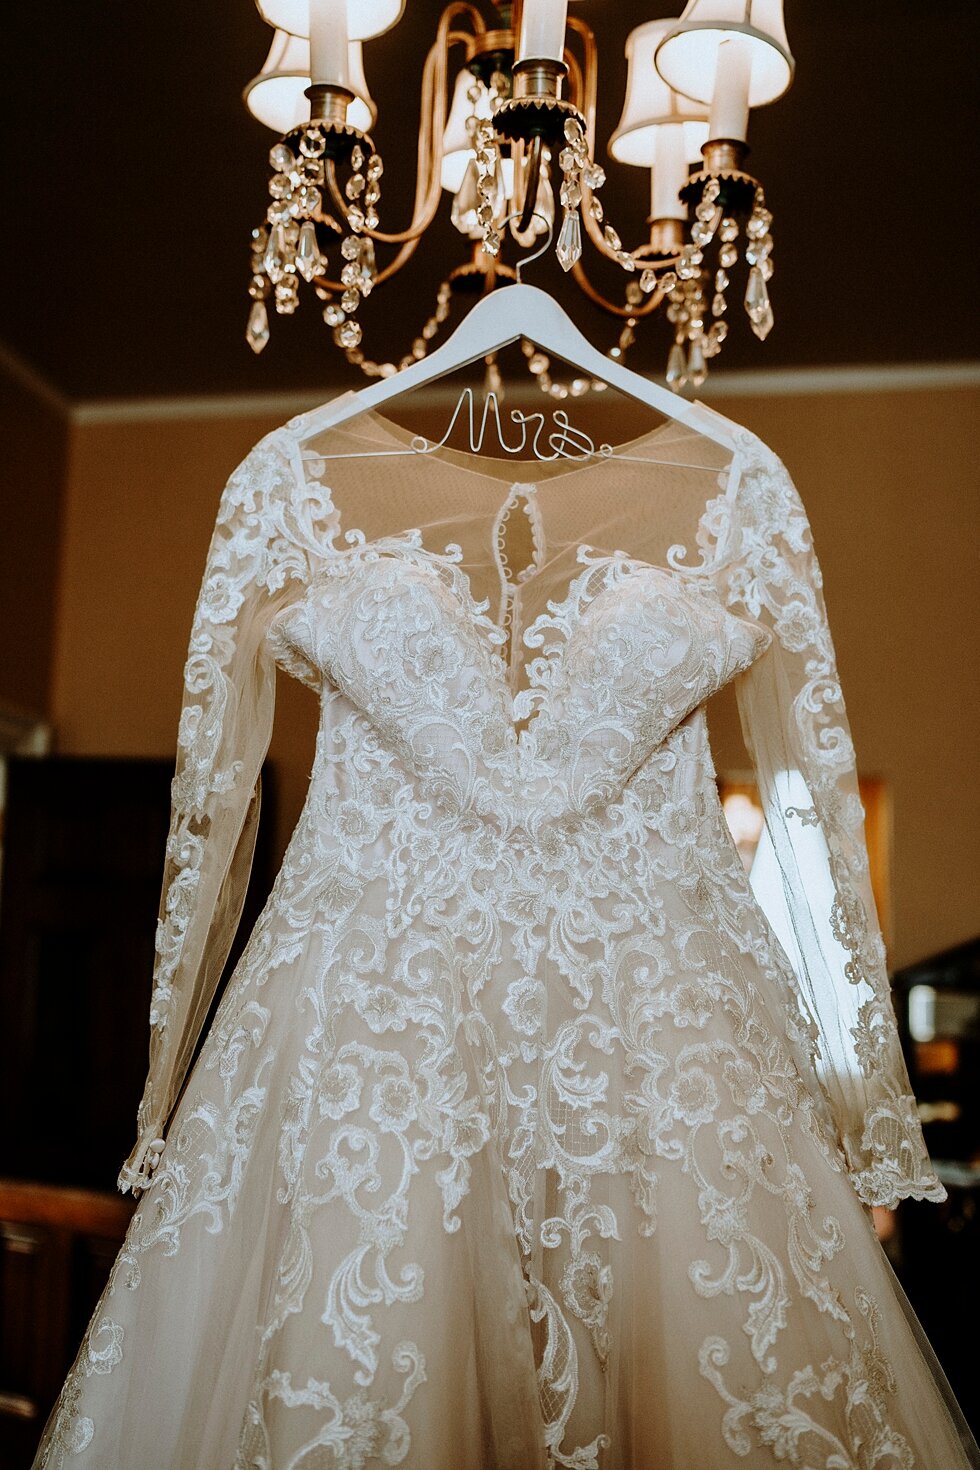  The beautiful Allure Bridal wedding gown on display before the wedding as the bride got ready. Brisk February winter wedding Pendennis Club Louisville, Kentucky southern wedding bride and groom carefree wedding breathtaking national register of hist